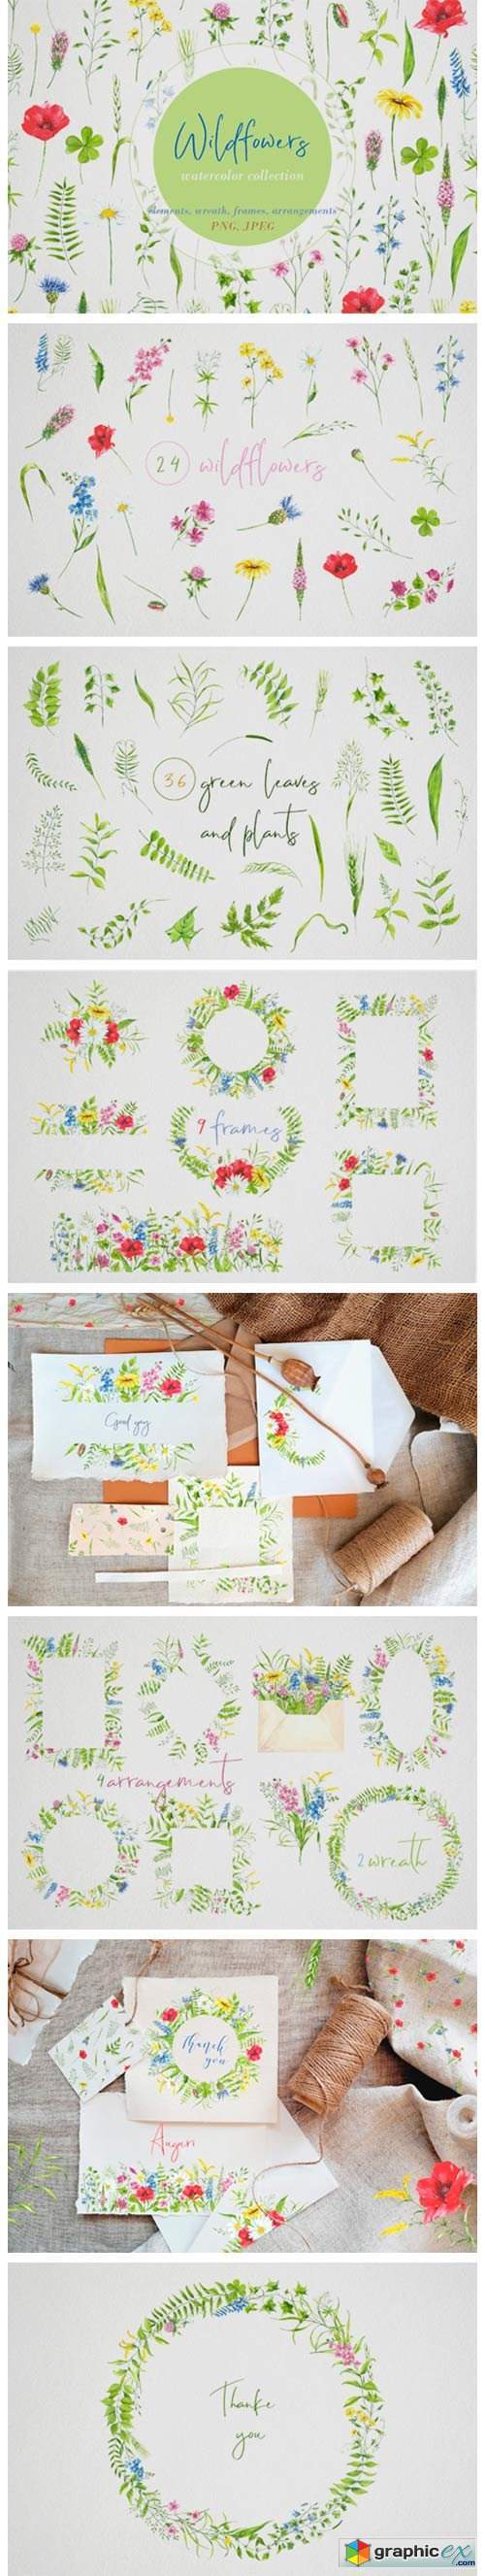 Watercolor Clipart Wildflowers, Plants